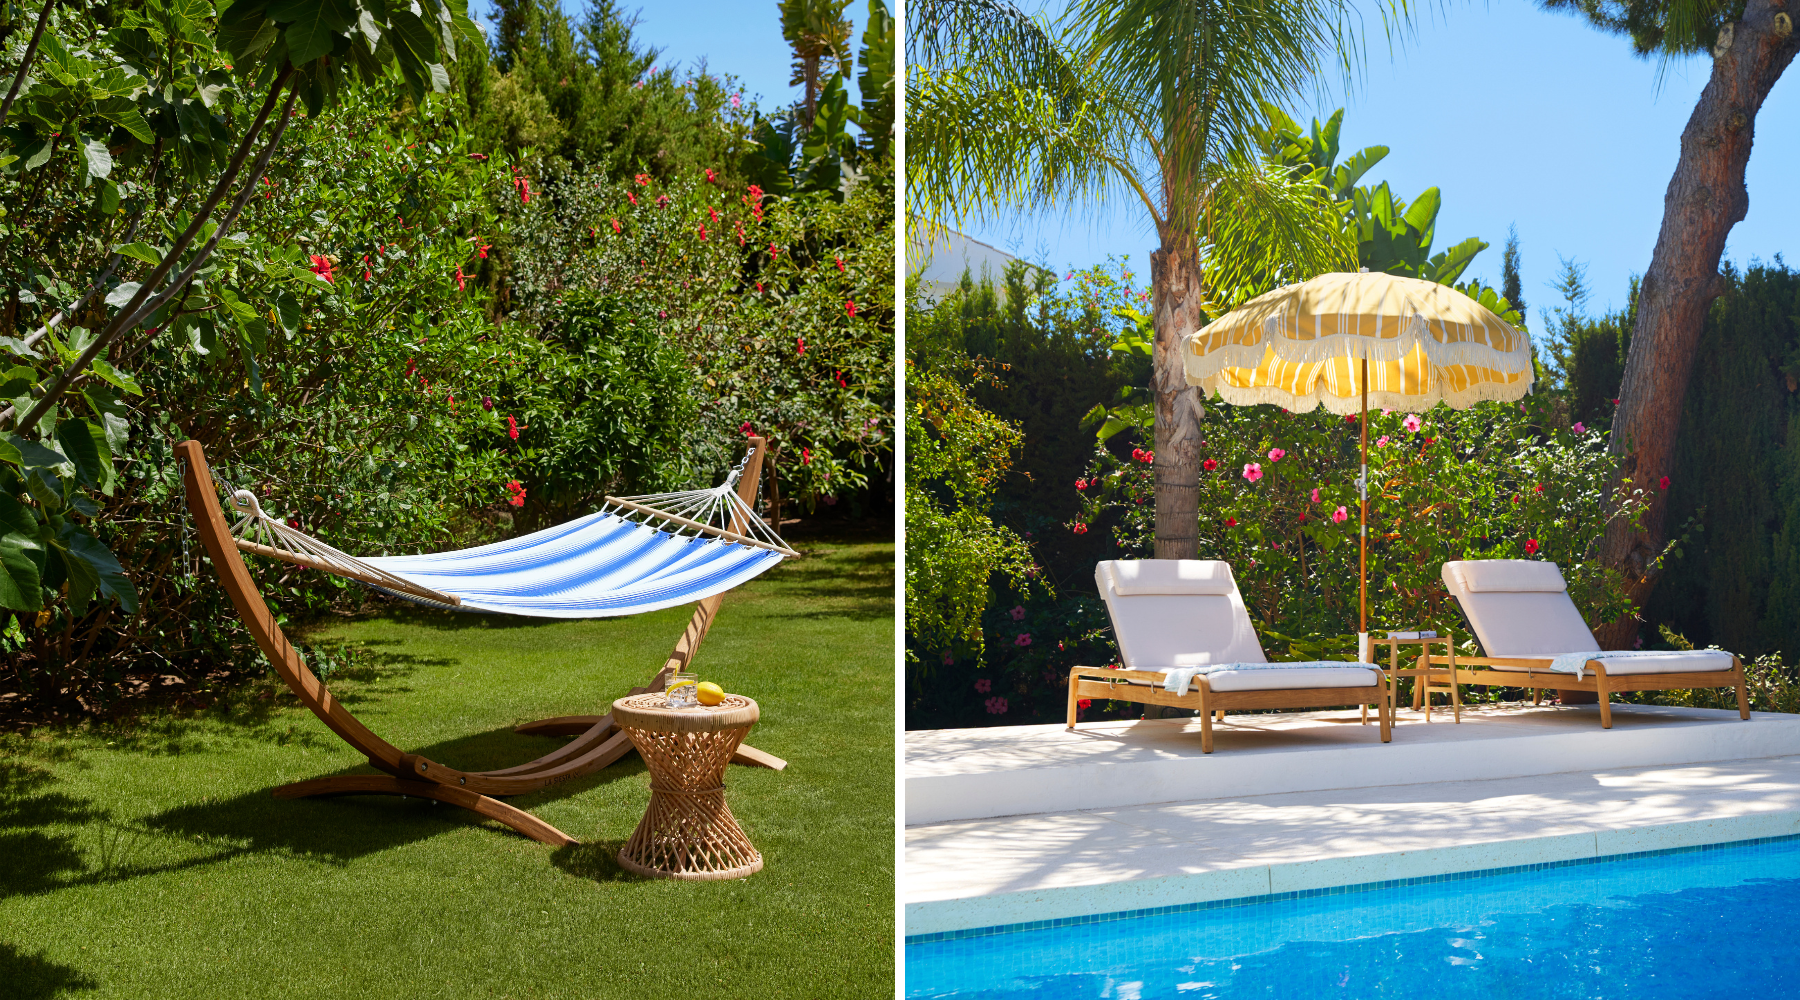 Omaze Marbella Superdraw - Garden Hammock and Sunloungers by the pool